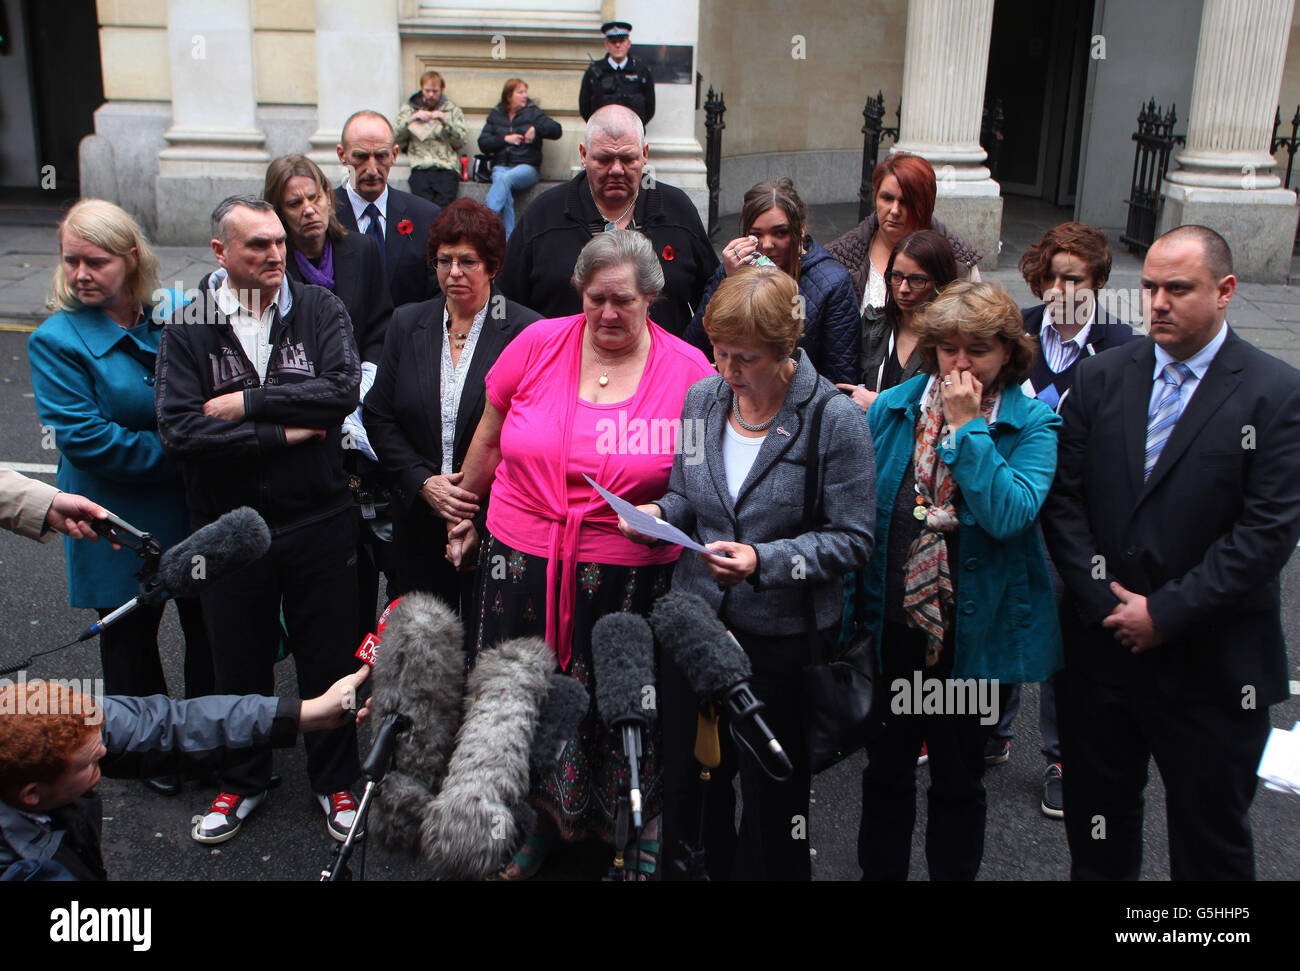 Bev Dawkins of Mencap reads a statement on behalf of the families who suffered abuse by 11 members of staff from the Winterbourne View care home who were caught on camera abusing severely disabled patients during an undercover BBC Panorama investigation at the South Gloucestershire private hospital. Stock Photo